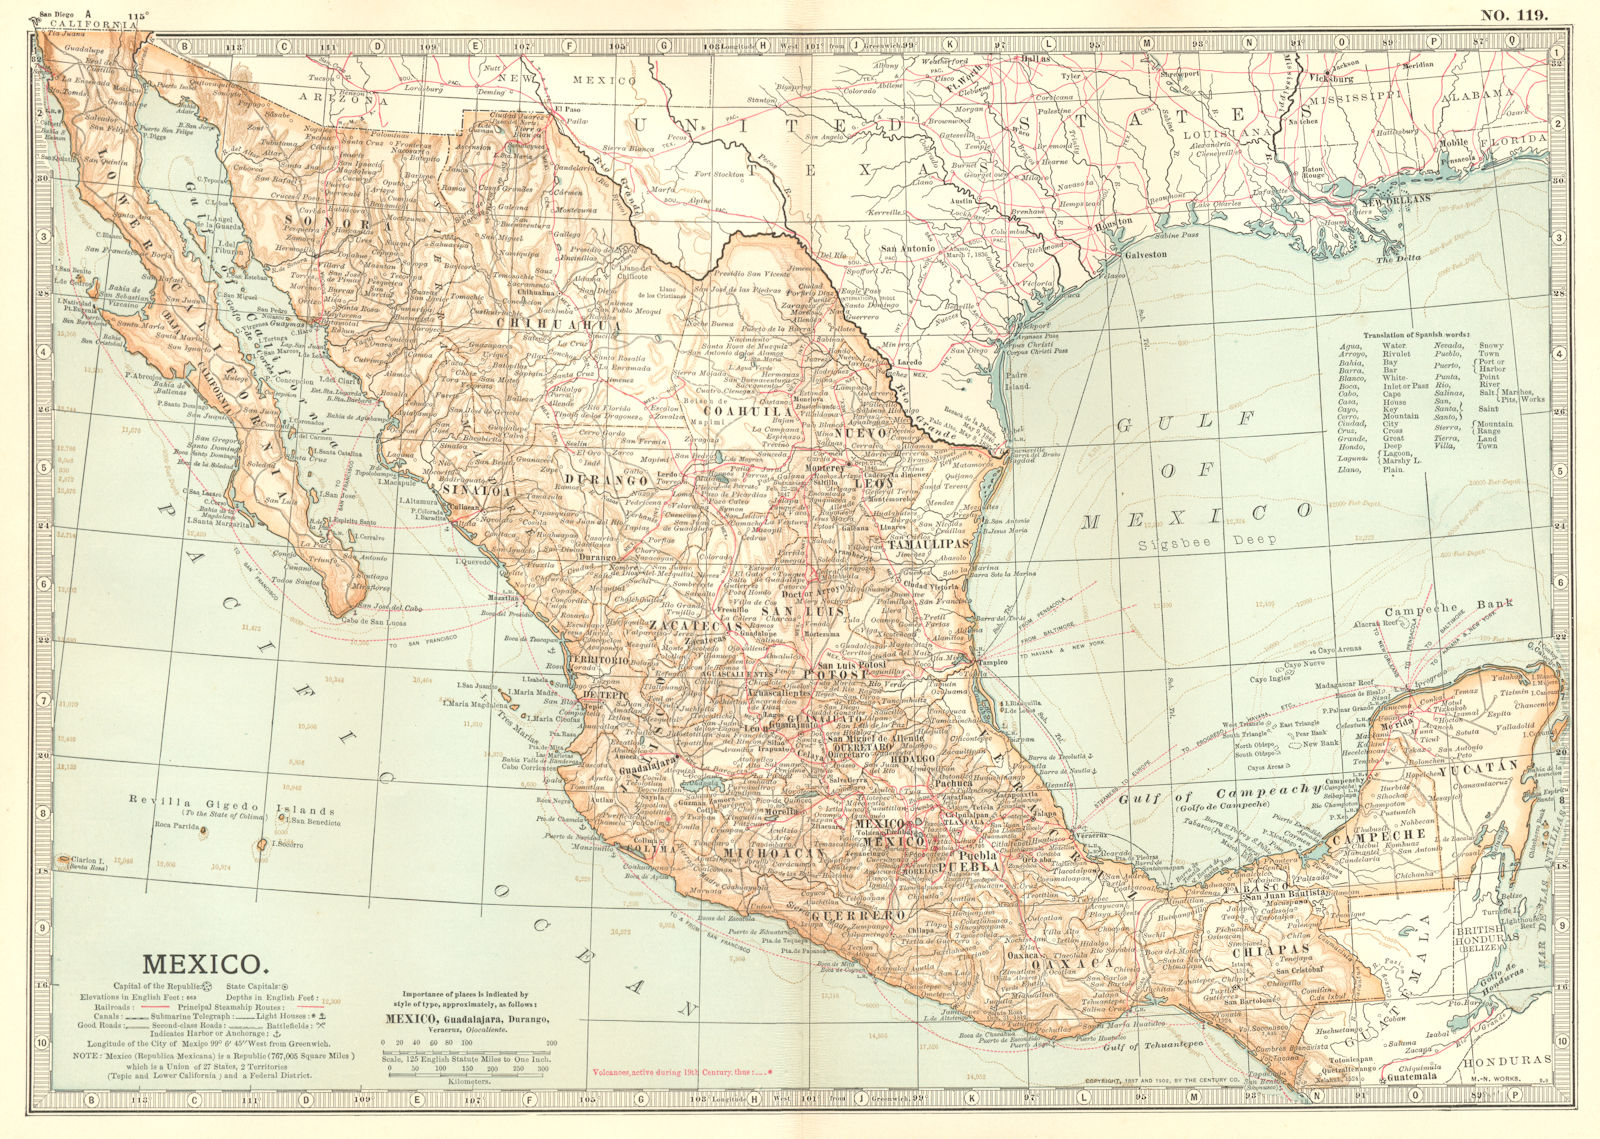 MEXICO. Showing railroads roads steamship routes & battlefields 1903 old map